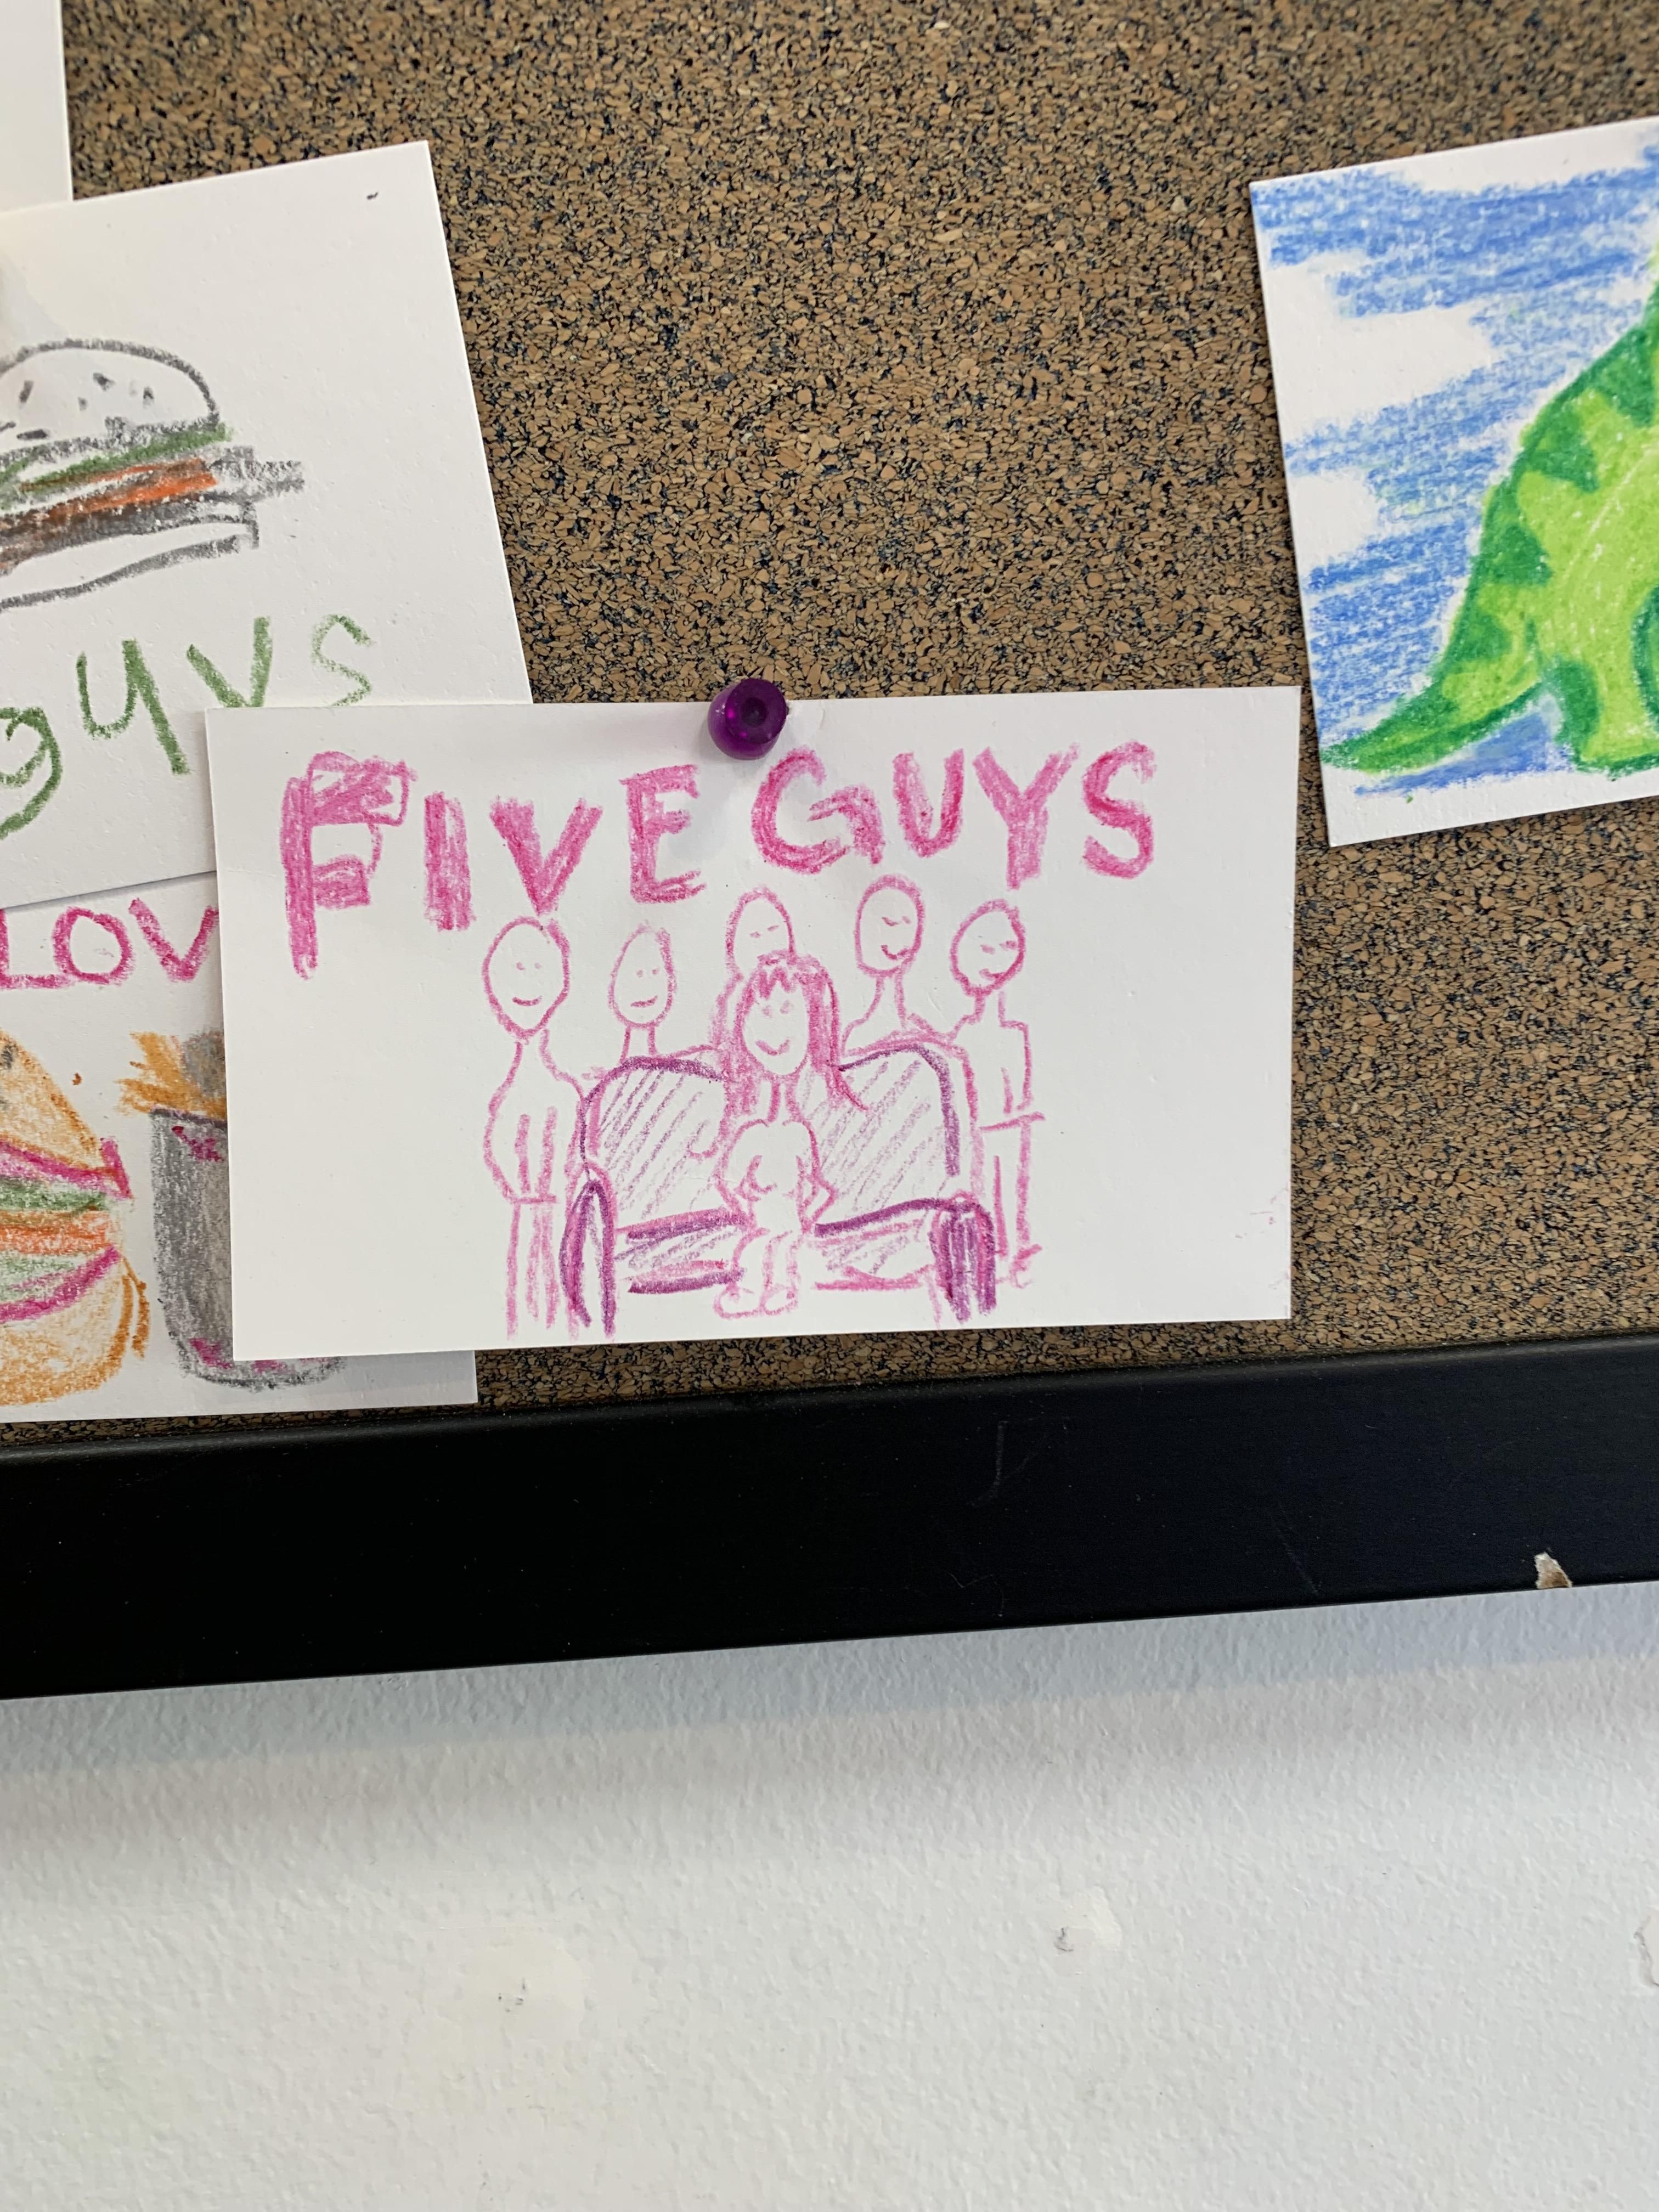 Found at my local Five Guys